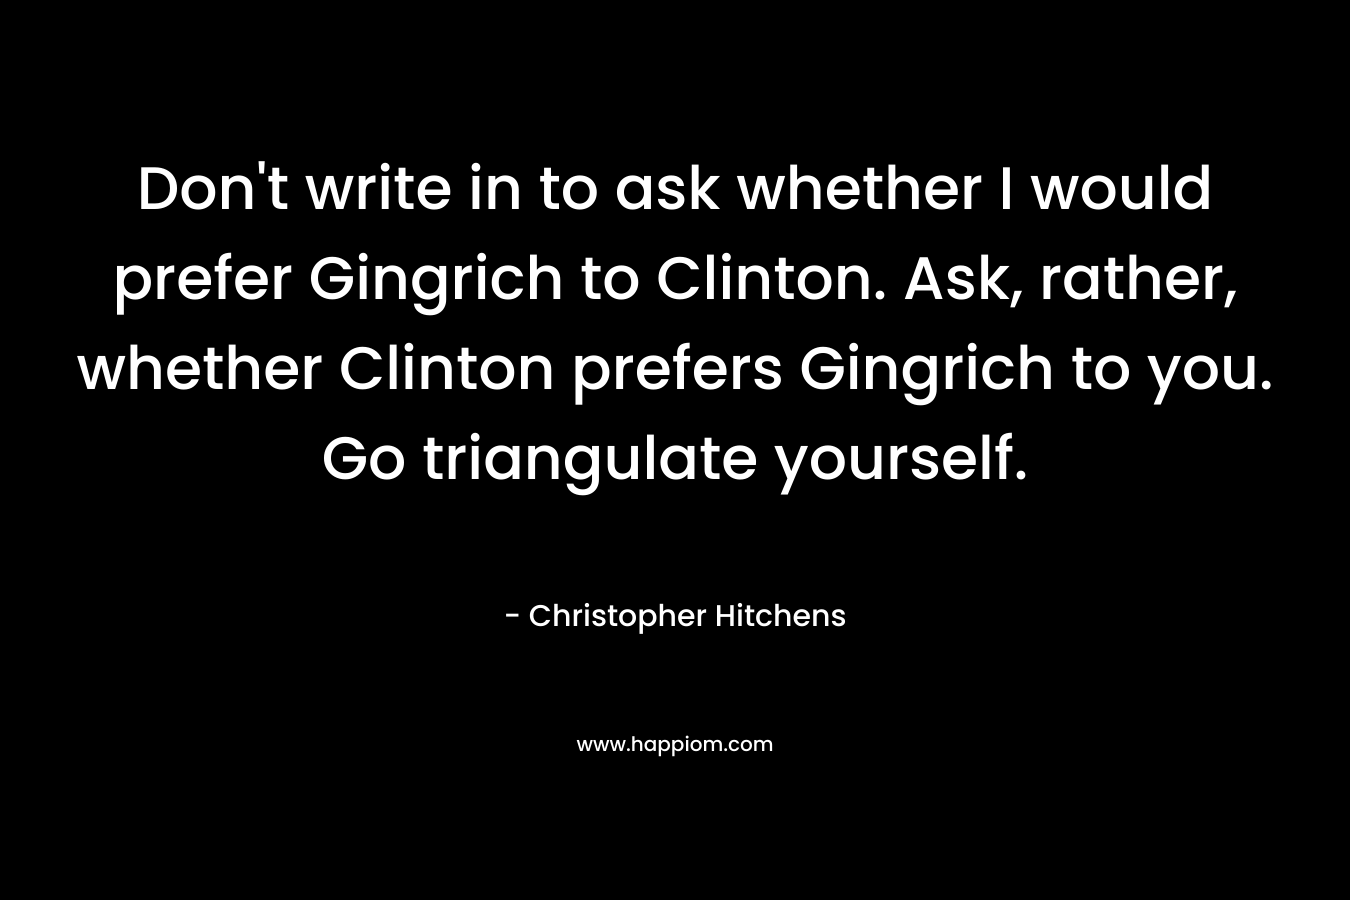 Don't write in to ask whether I would prefer Gingrich to Clinton. Ask, rather, whether Clinton prefers Gingrich to you. Go triangulate yourself.